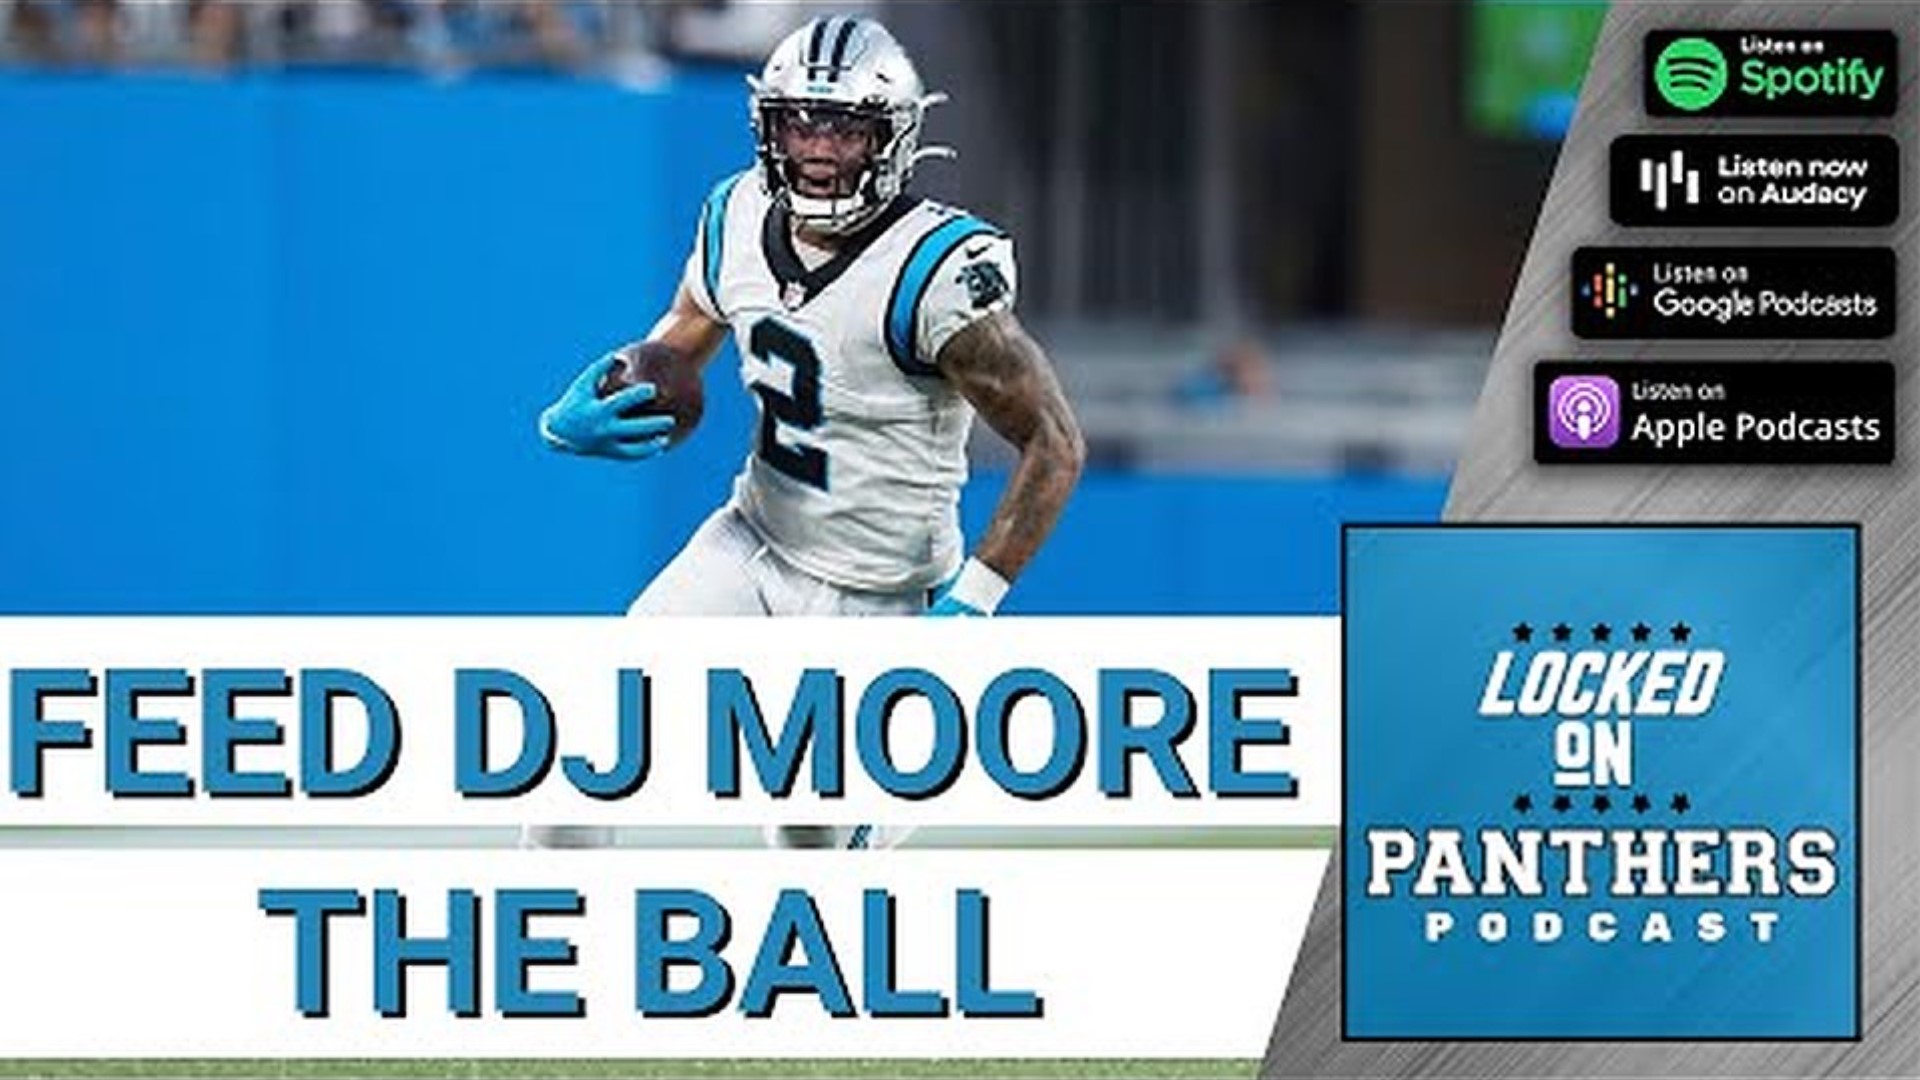 The Panthers are looking for the team's first home win since defeating the Saints in Week 2 of the 2021 season.